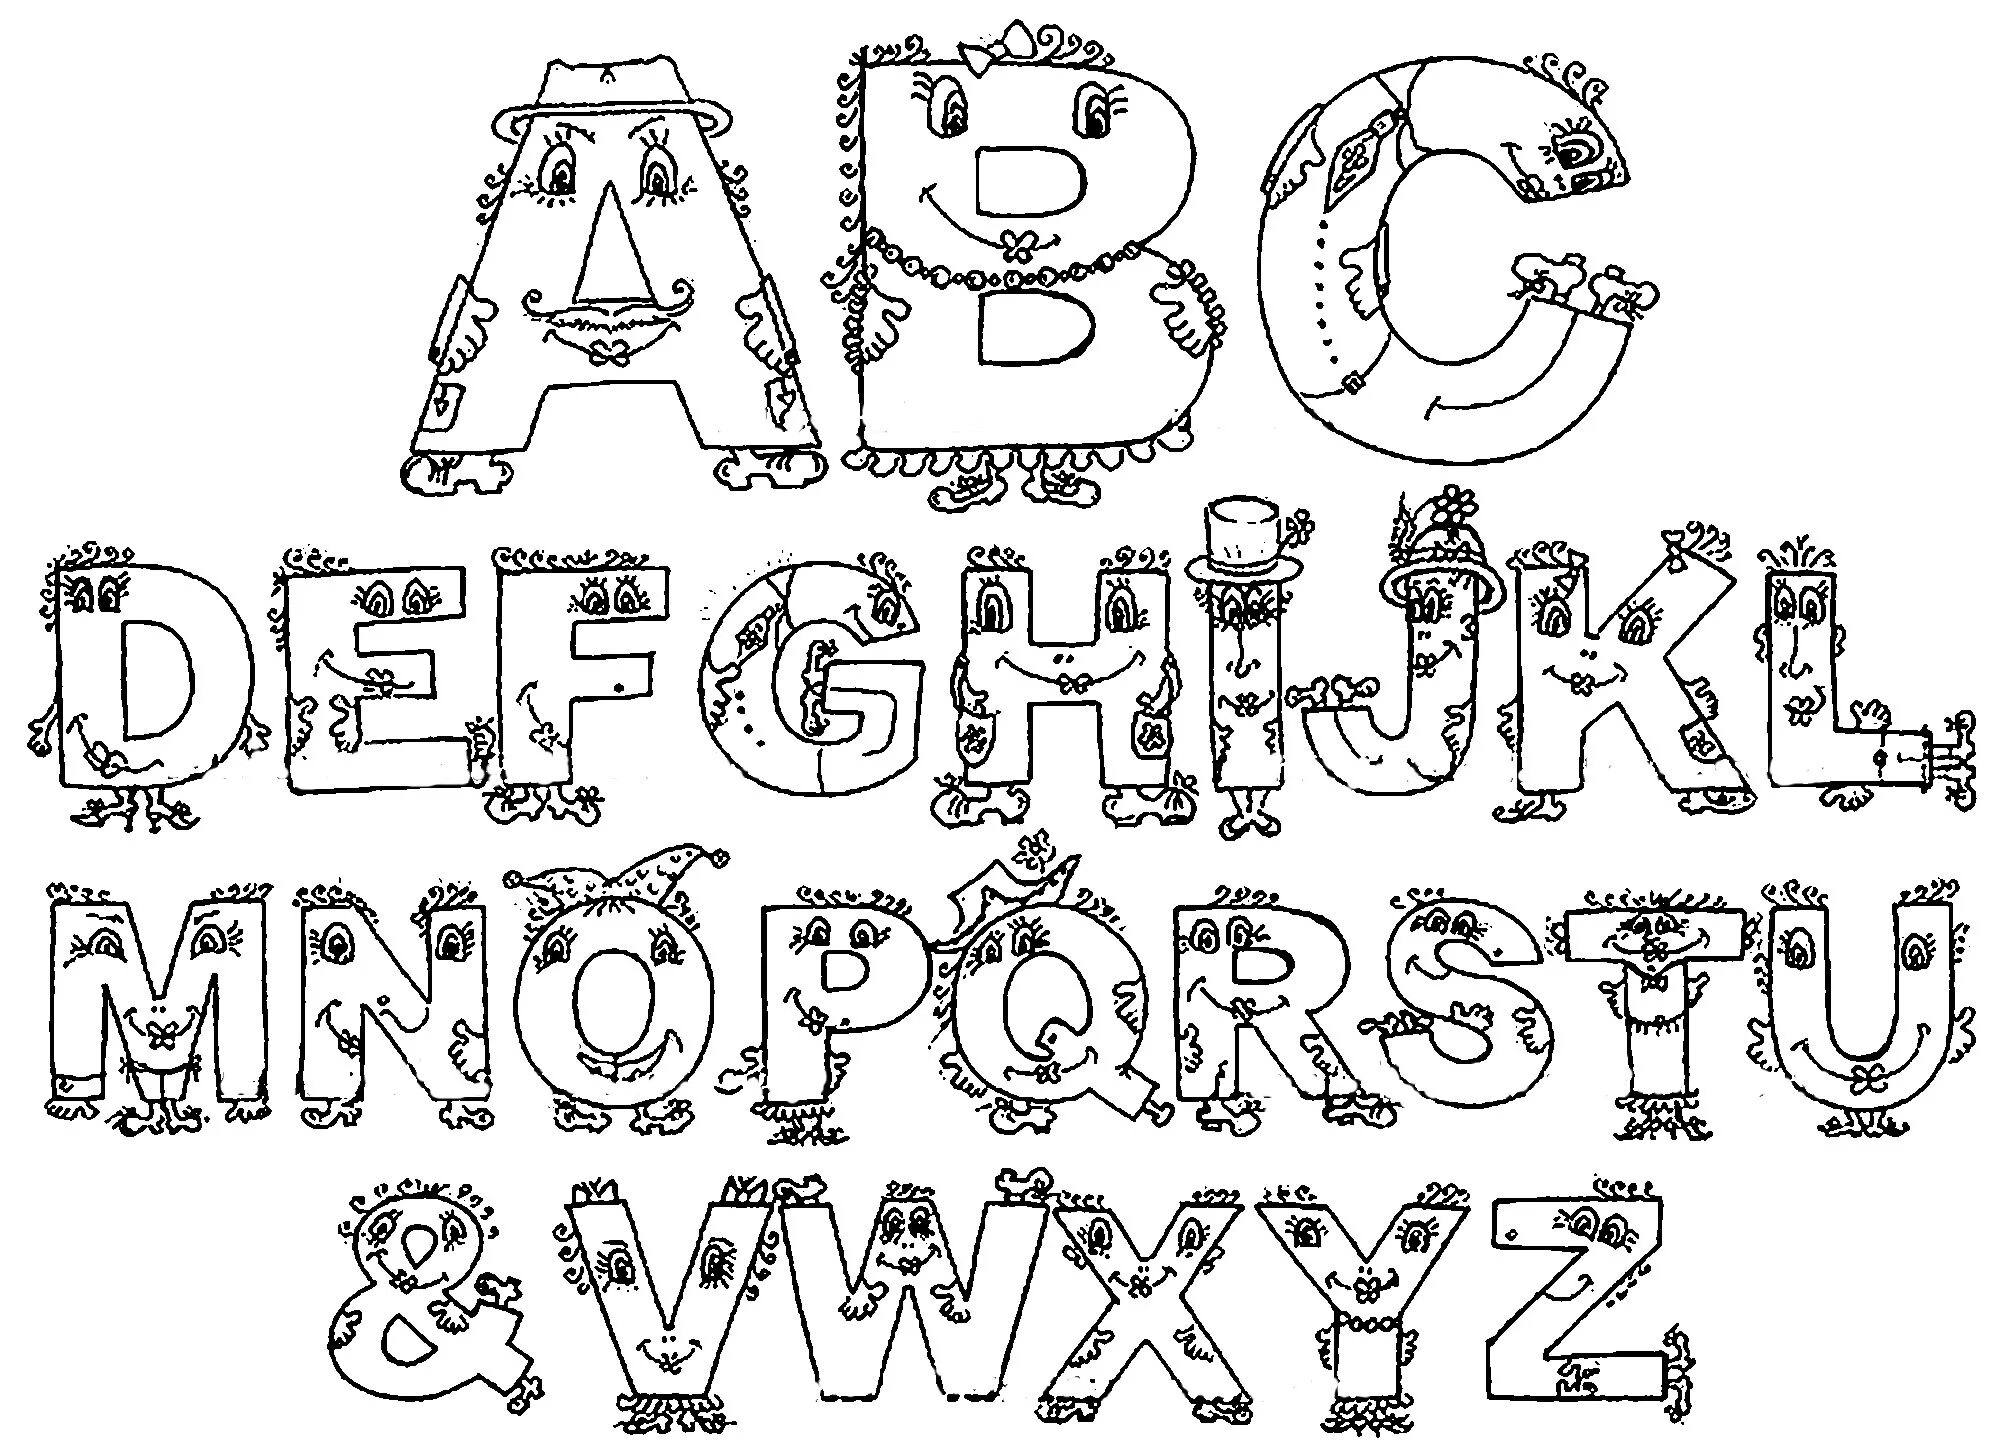 Blissful knowledge of the alphabet with eyes